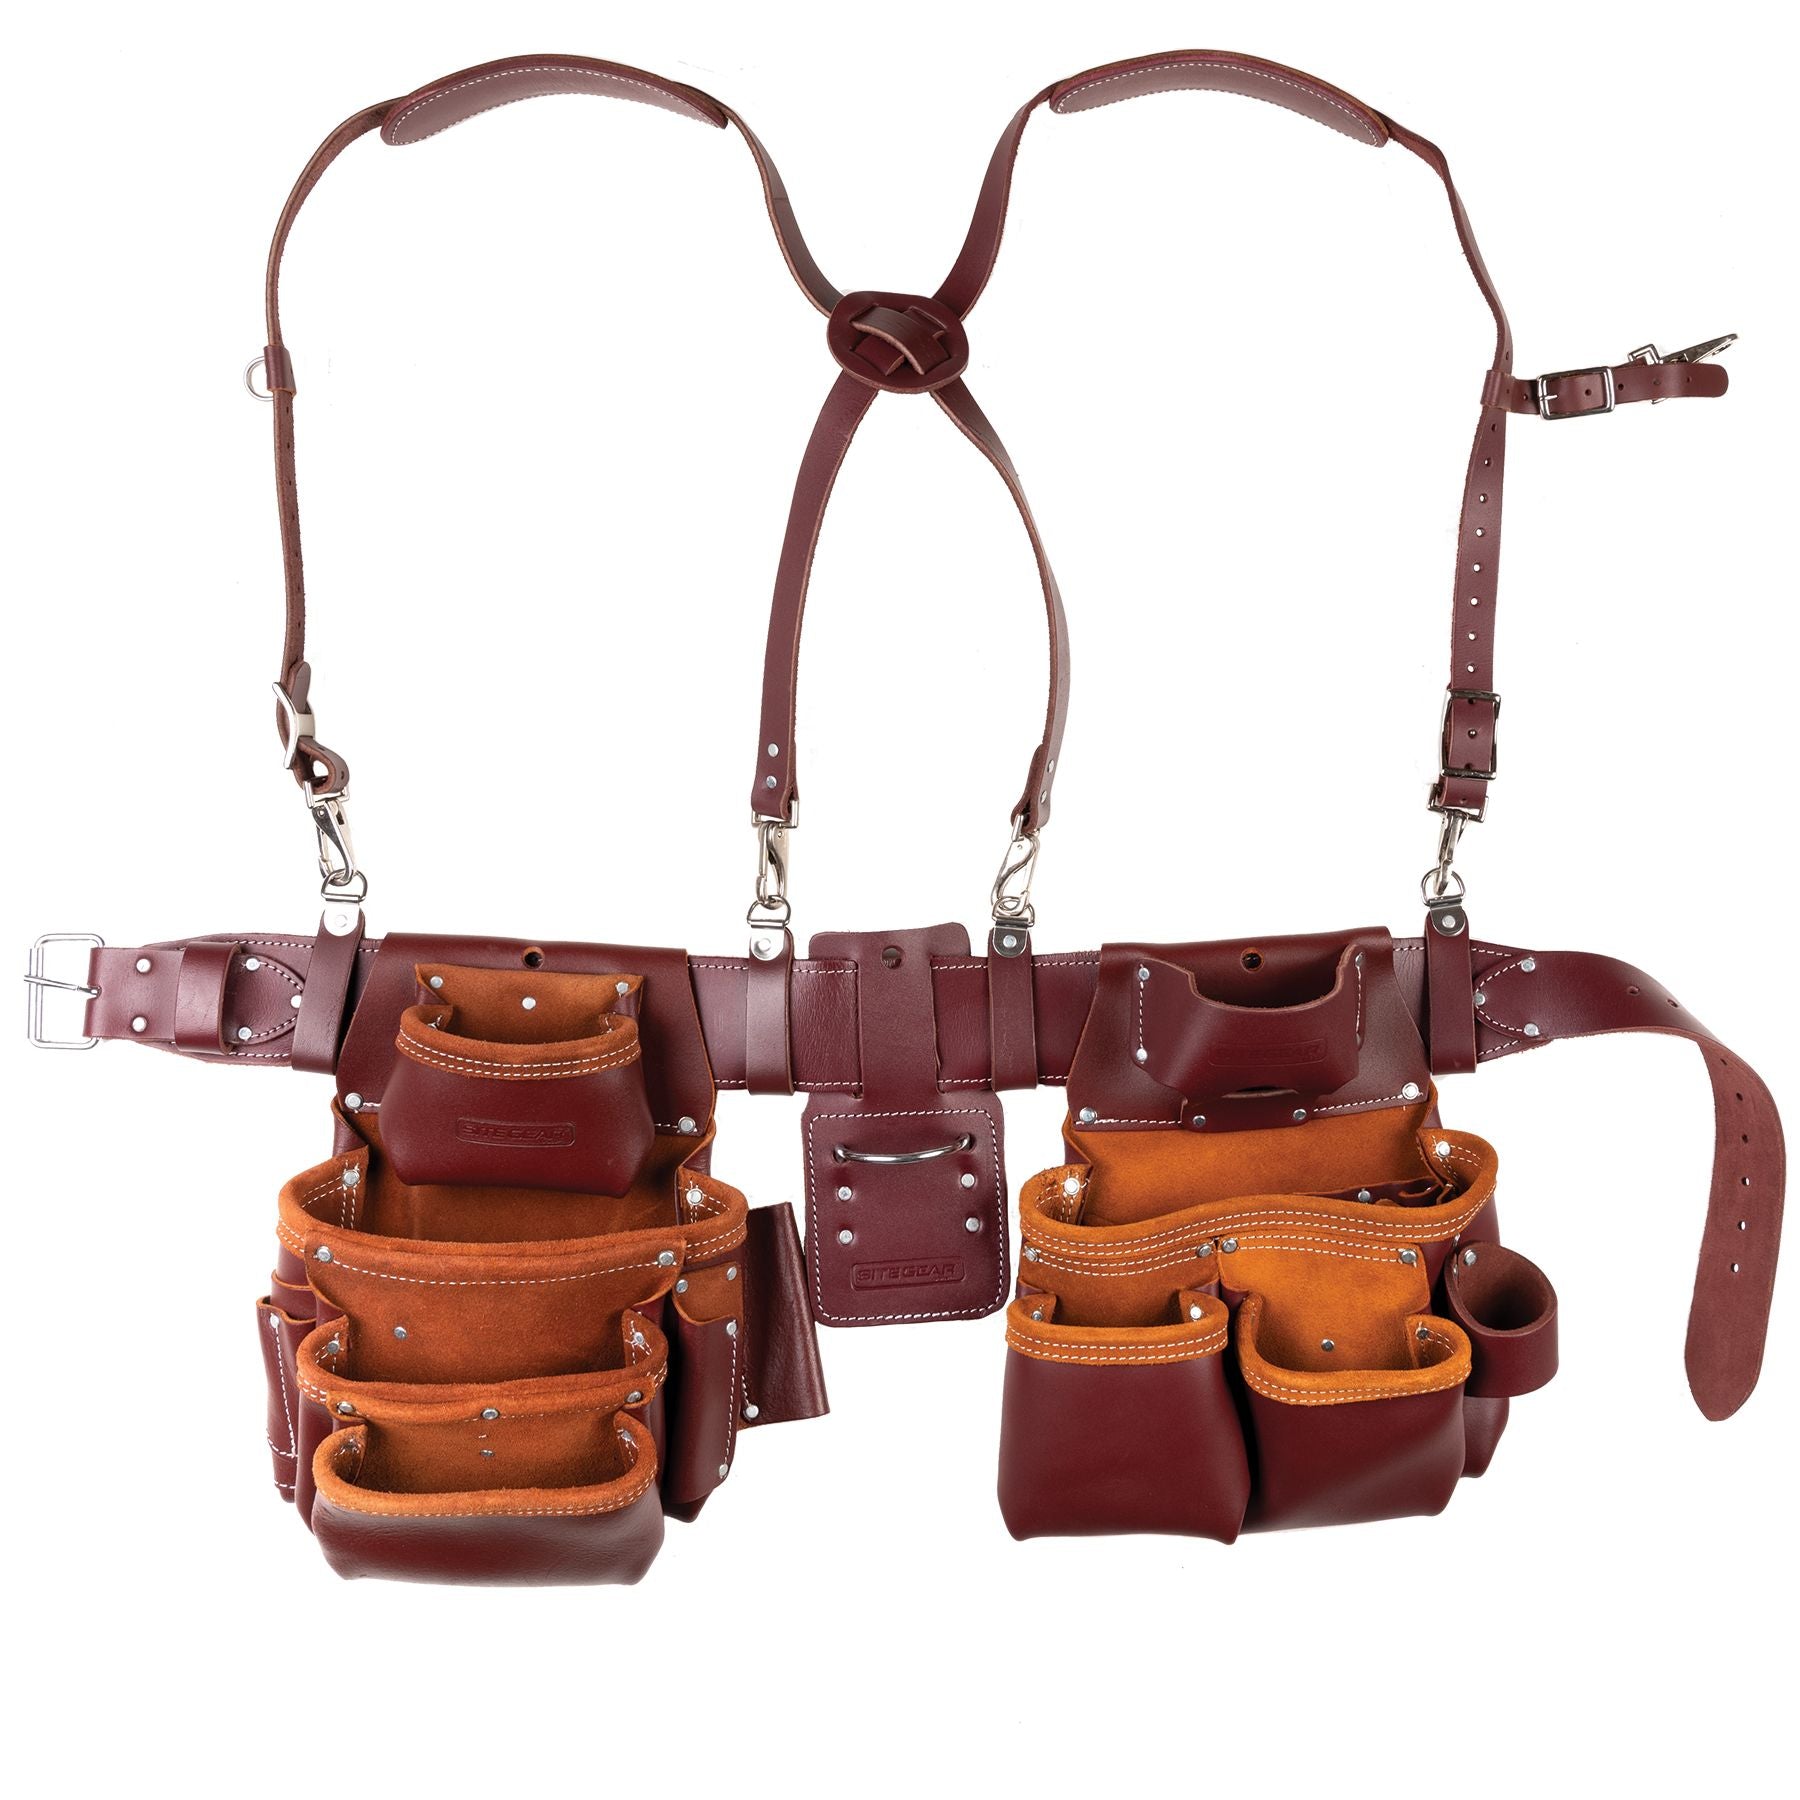 SitePro 51-15089S-M 7 Pouch Framer Complete Set, with Suspenders